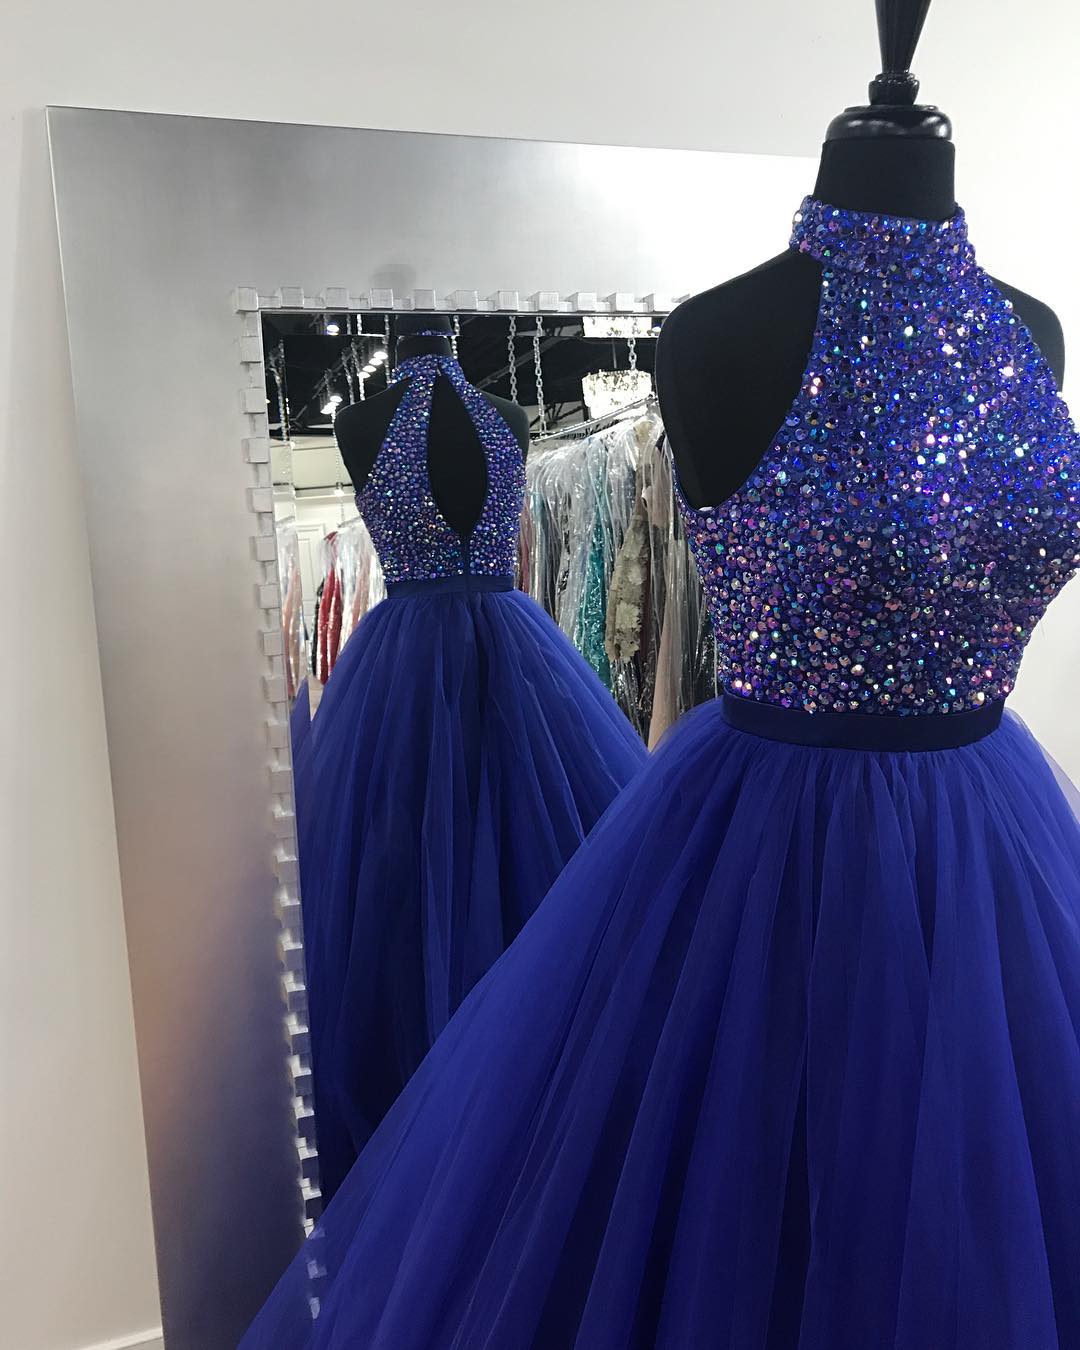 Royal Blue Tulle High Neck Prom Ball Gown Dresses With Crystals Beaded Bodice